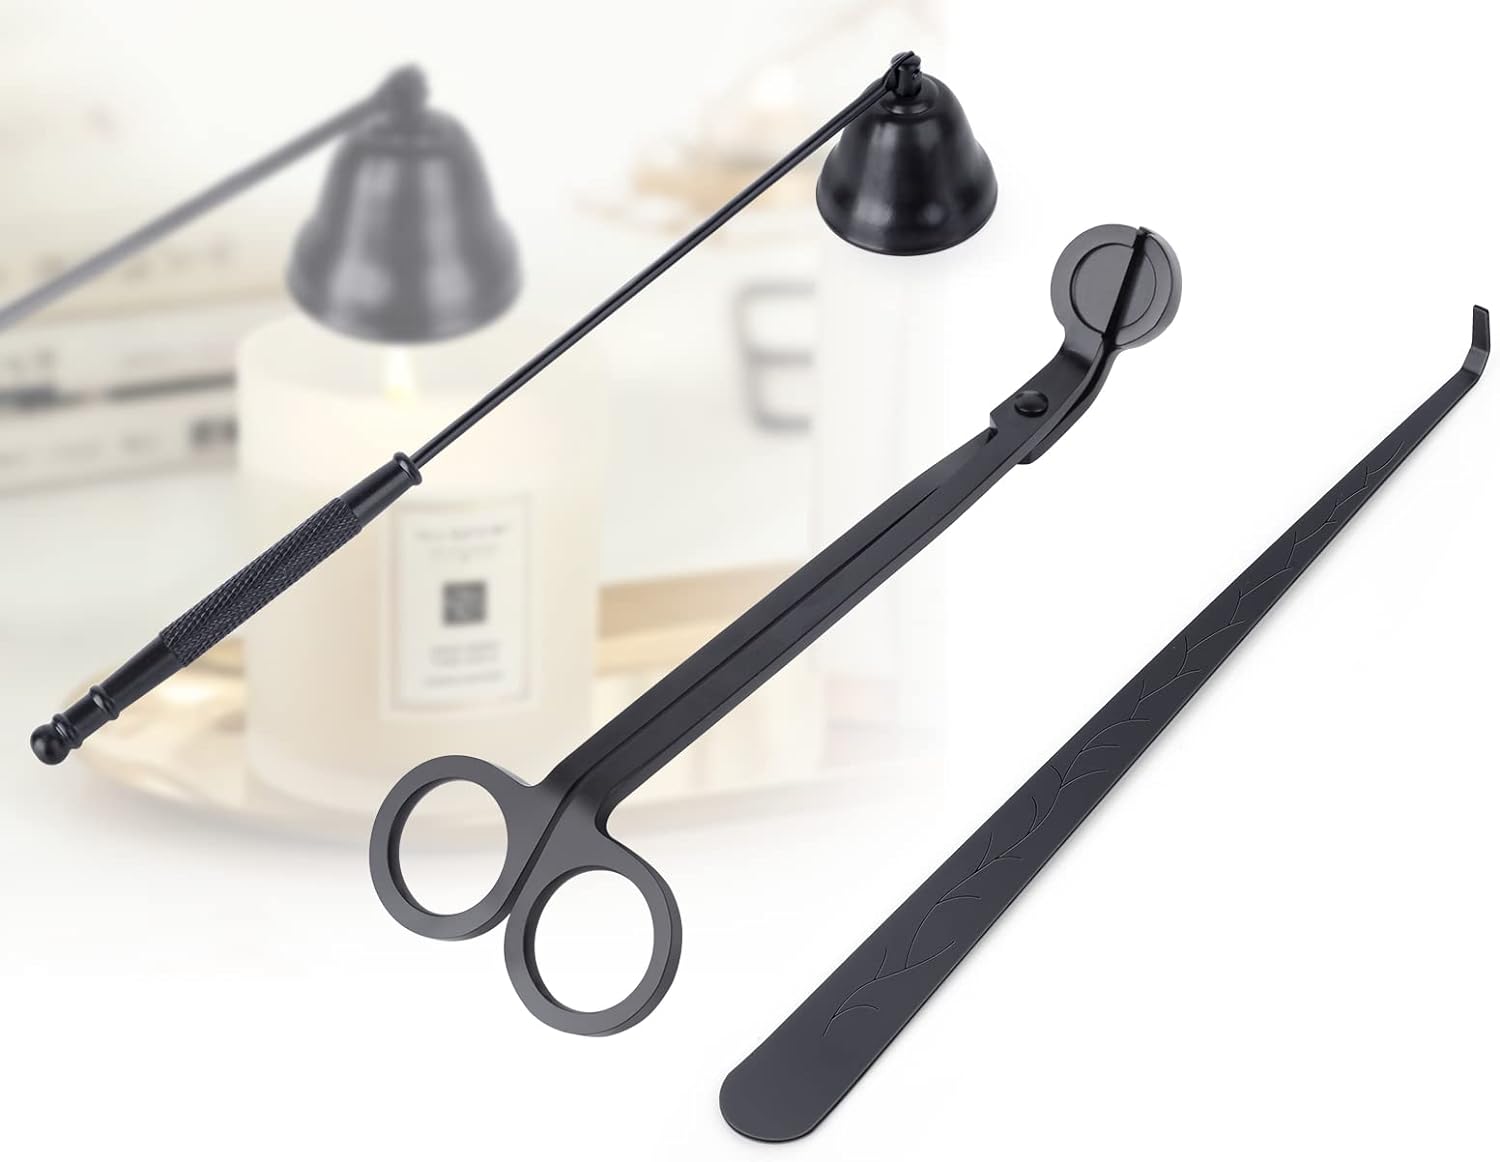 3 in 1 Candle Tools Set, Candle Wick Trimmer, Candle Cutter, Candle Snuffer, Candle Wick Dipper Accessory Set - Black